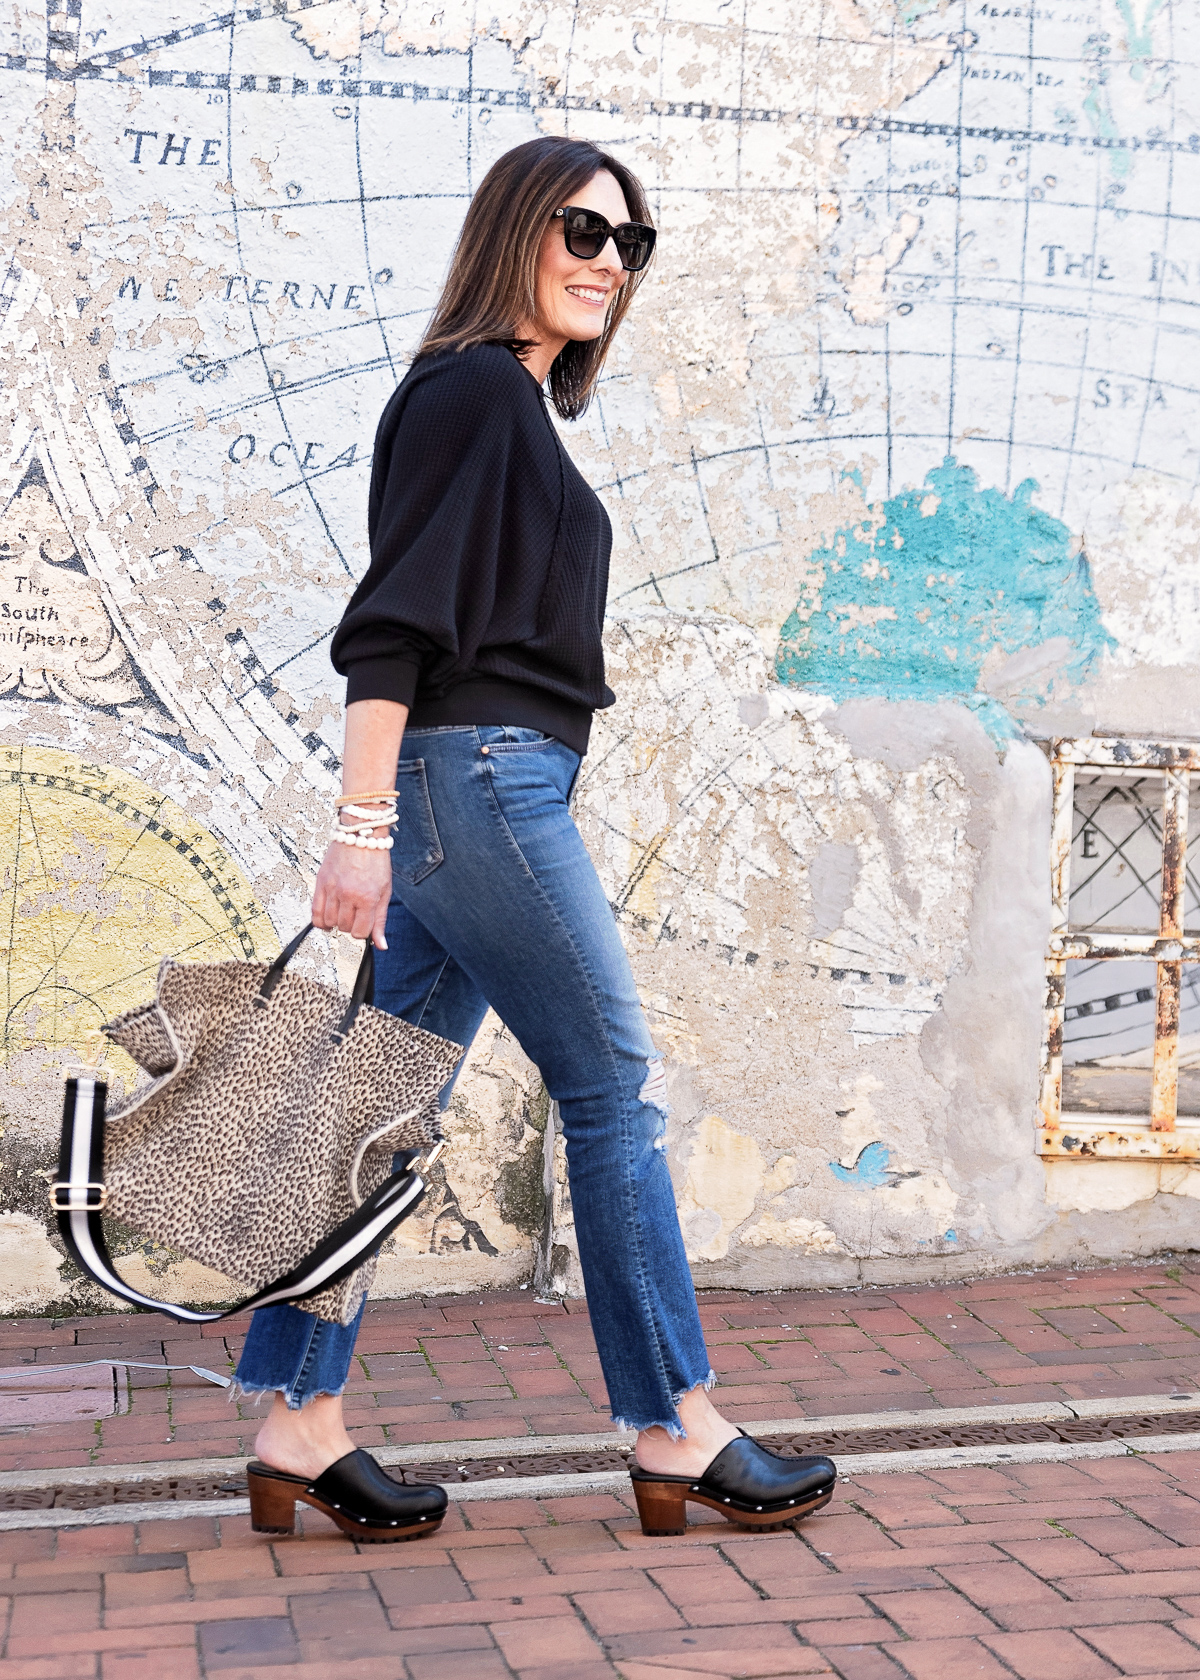 5 Shoe Styles to Wear With Flared Jeans